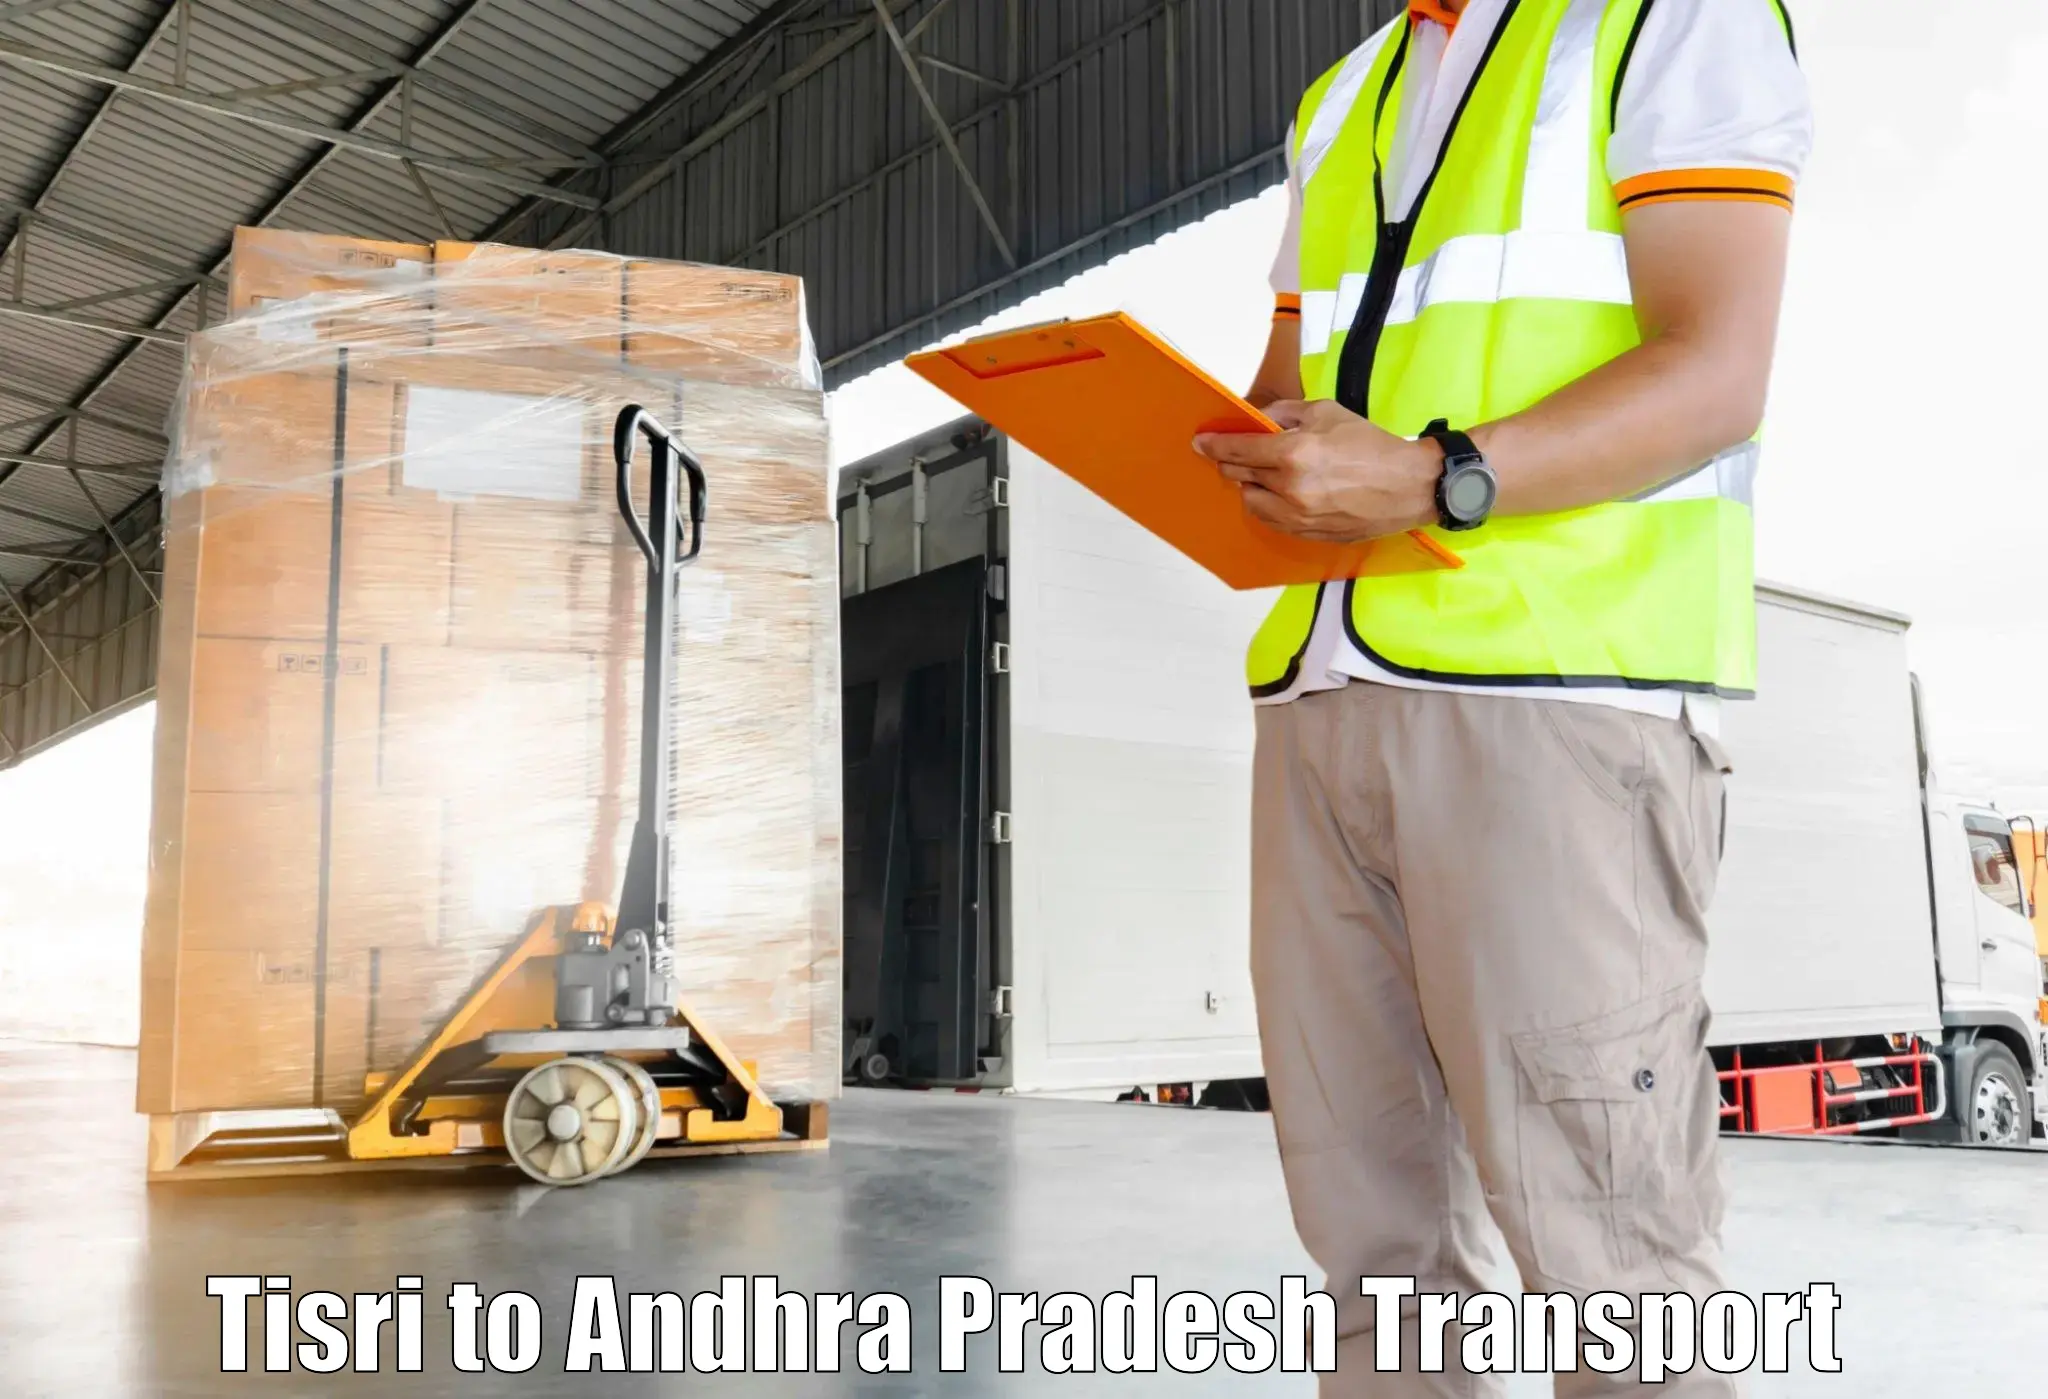 Transport bike from one state to another Tisri to Andhra Pradesh